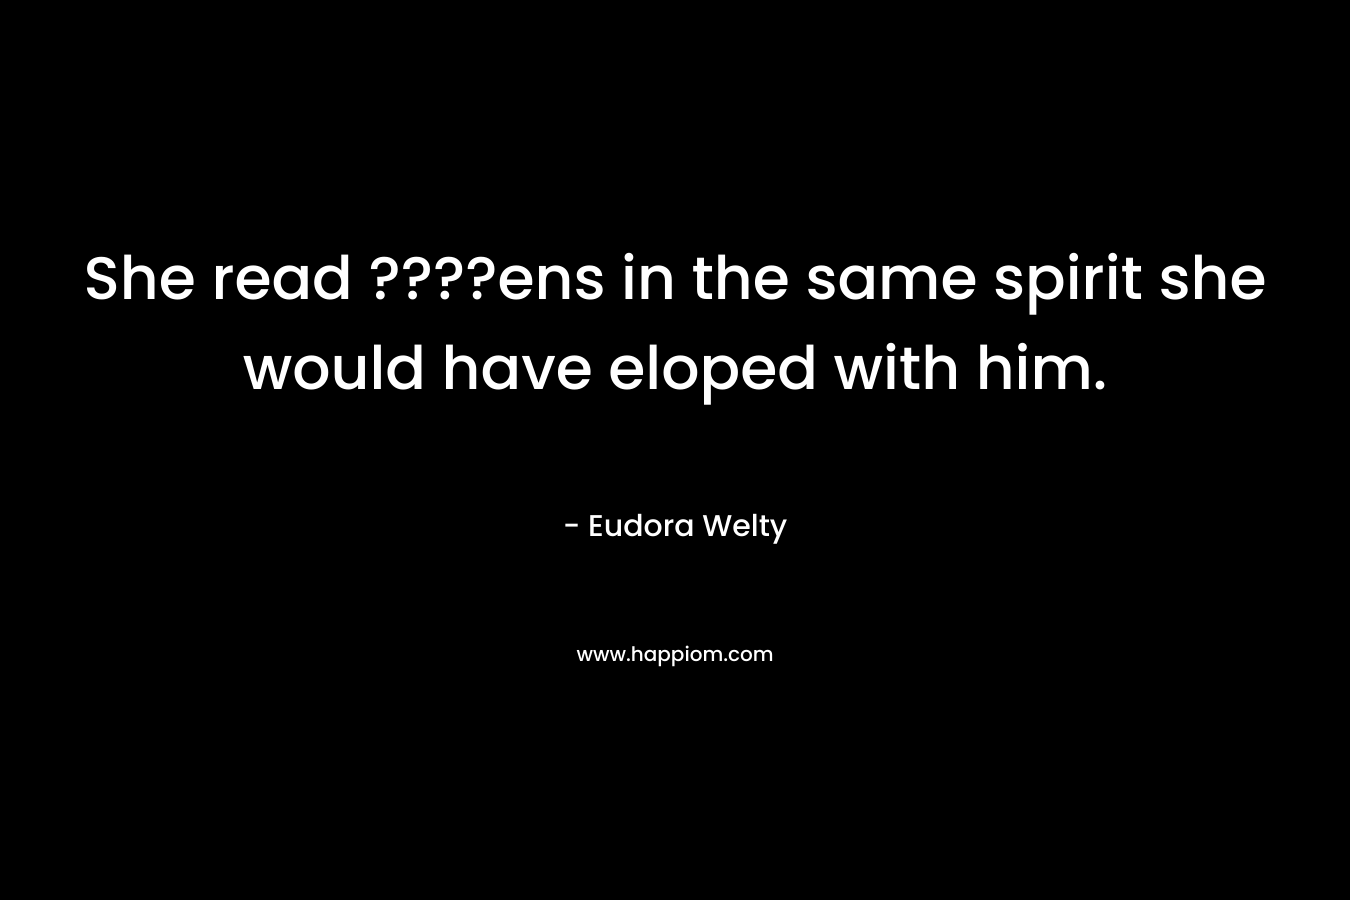 She read ????ens in the same spirit she would have eloped with him. – Eudora Welty